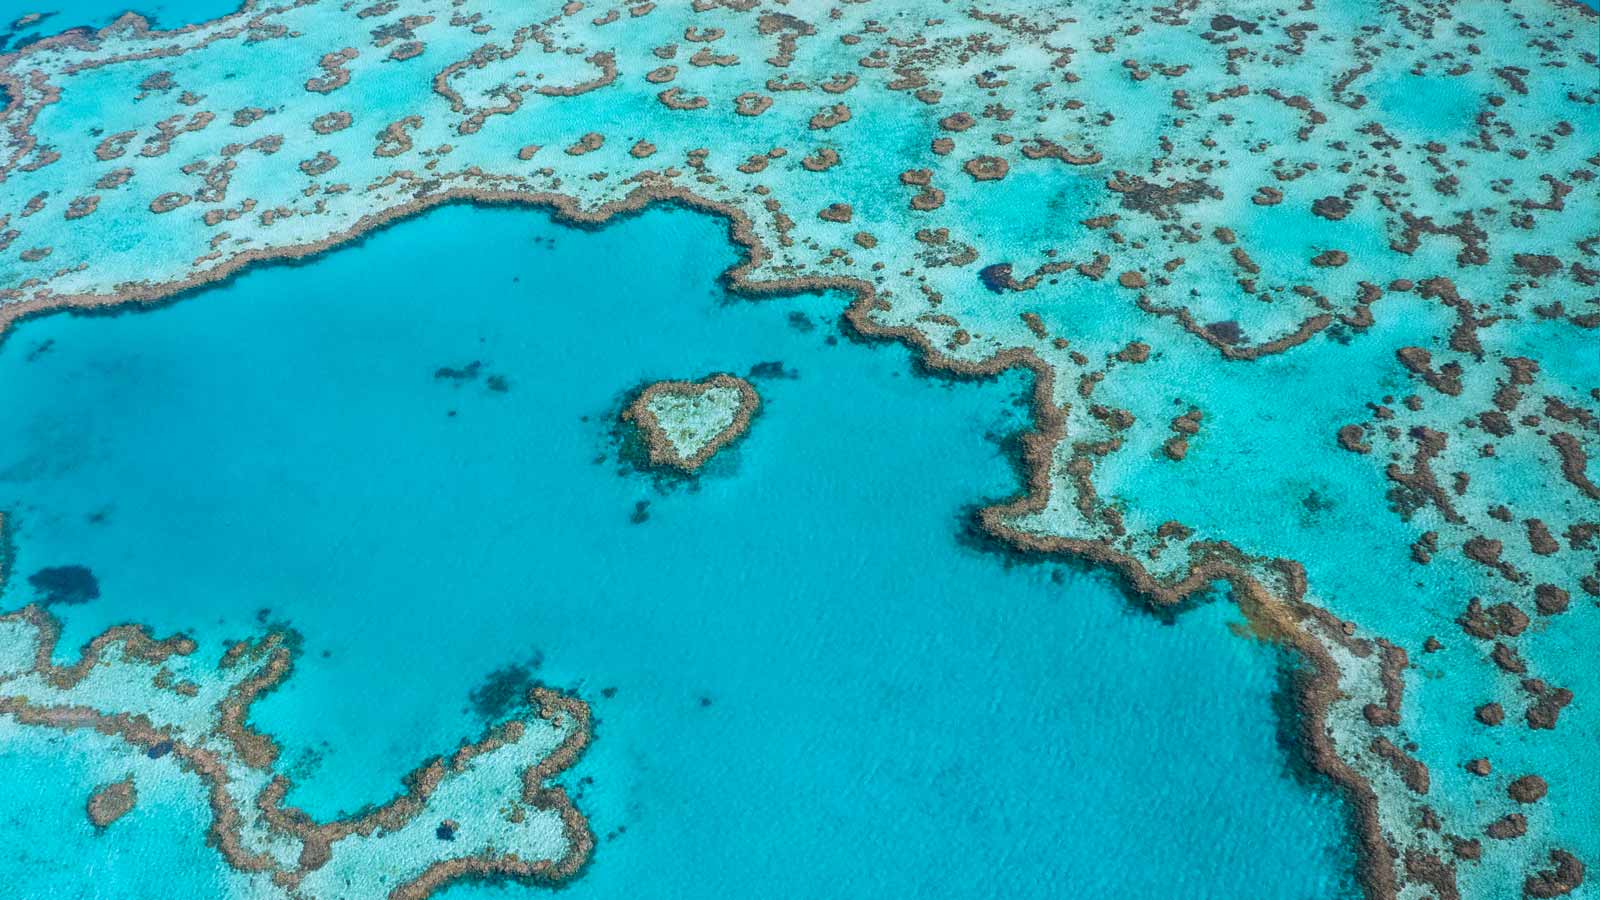 I Visited The Great Barrier Reef Before It Dies – And You Should Too